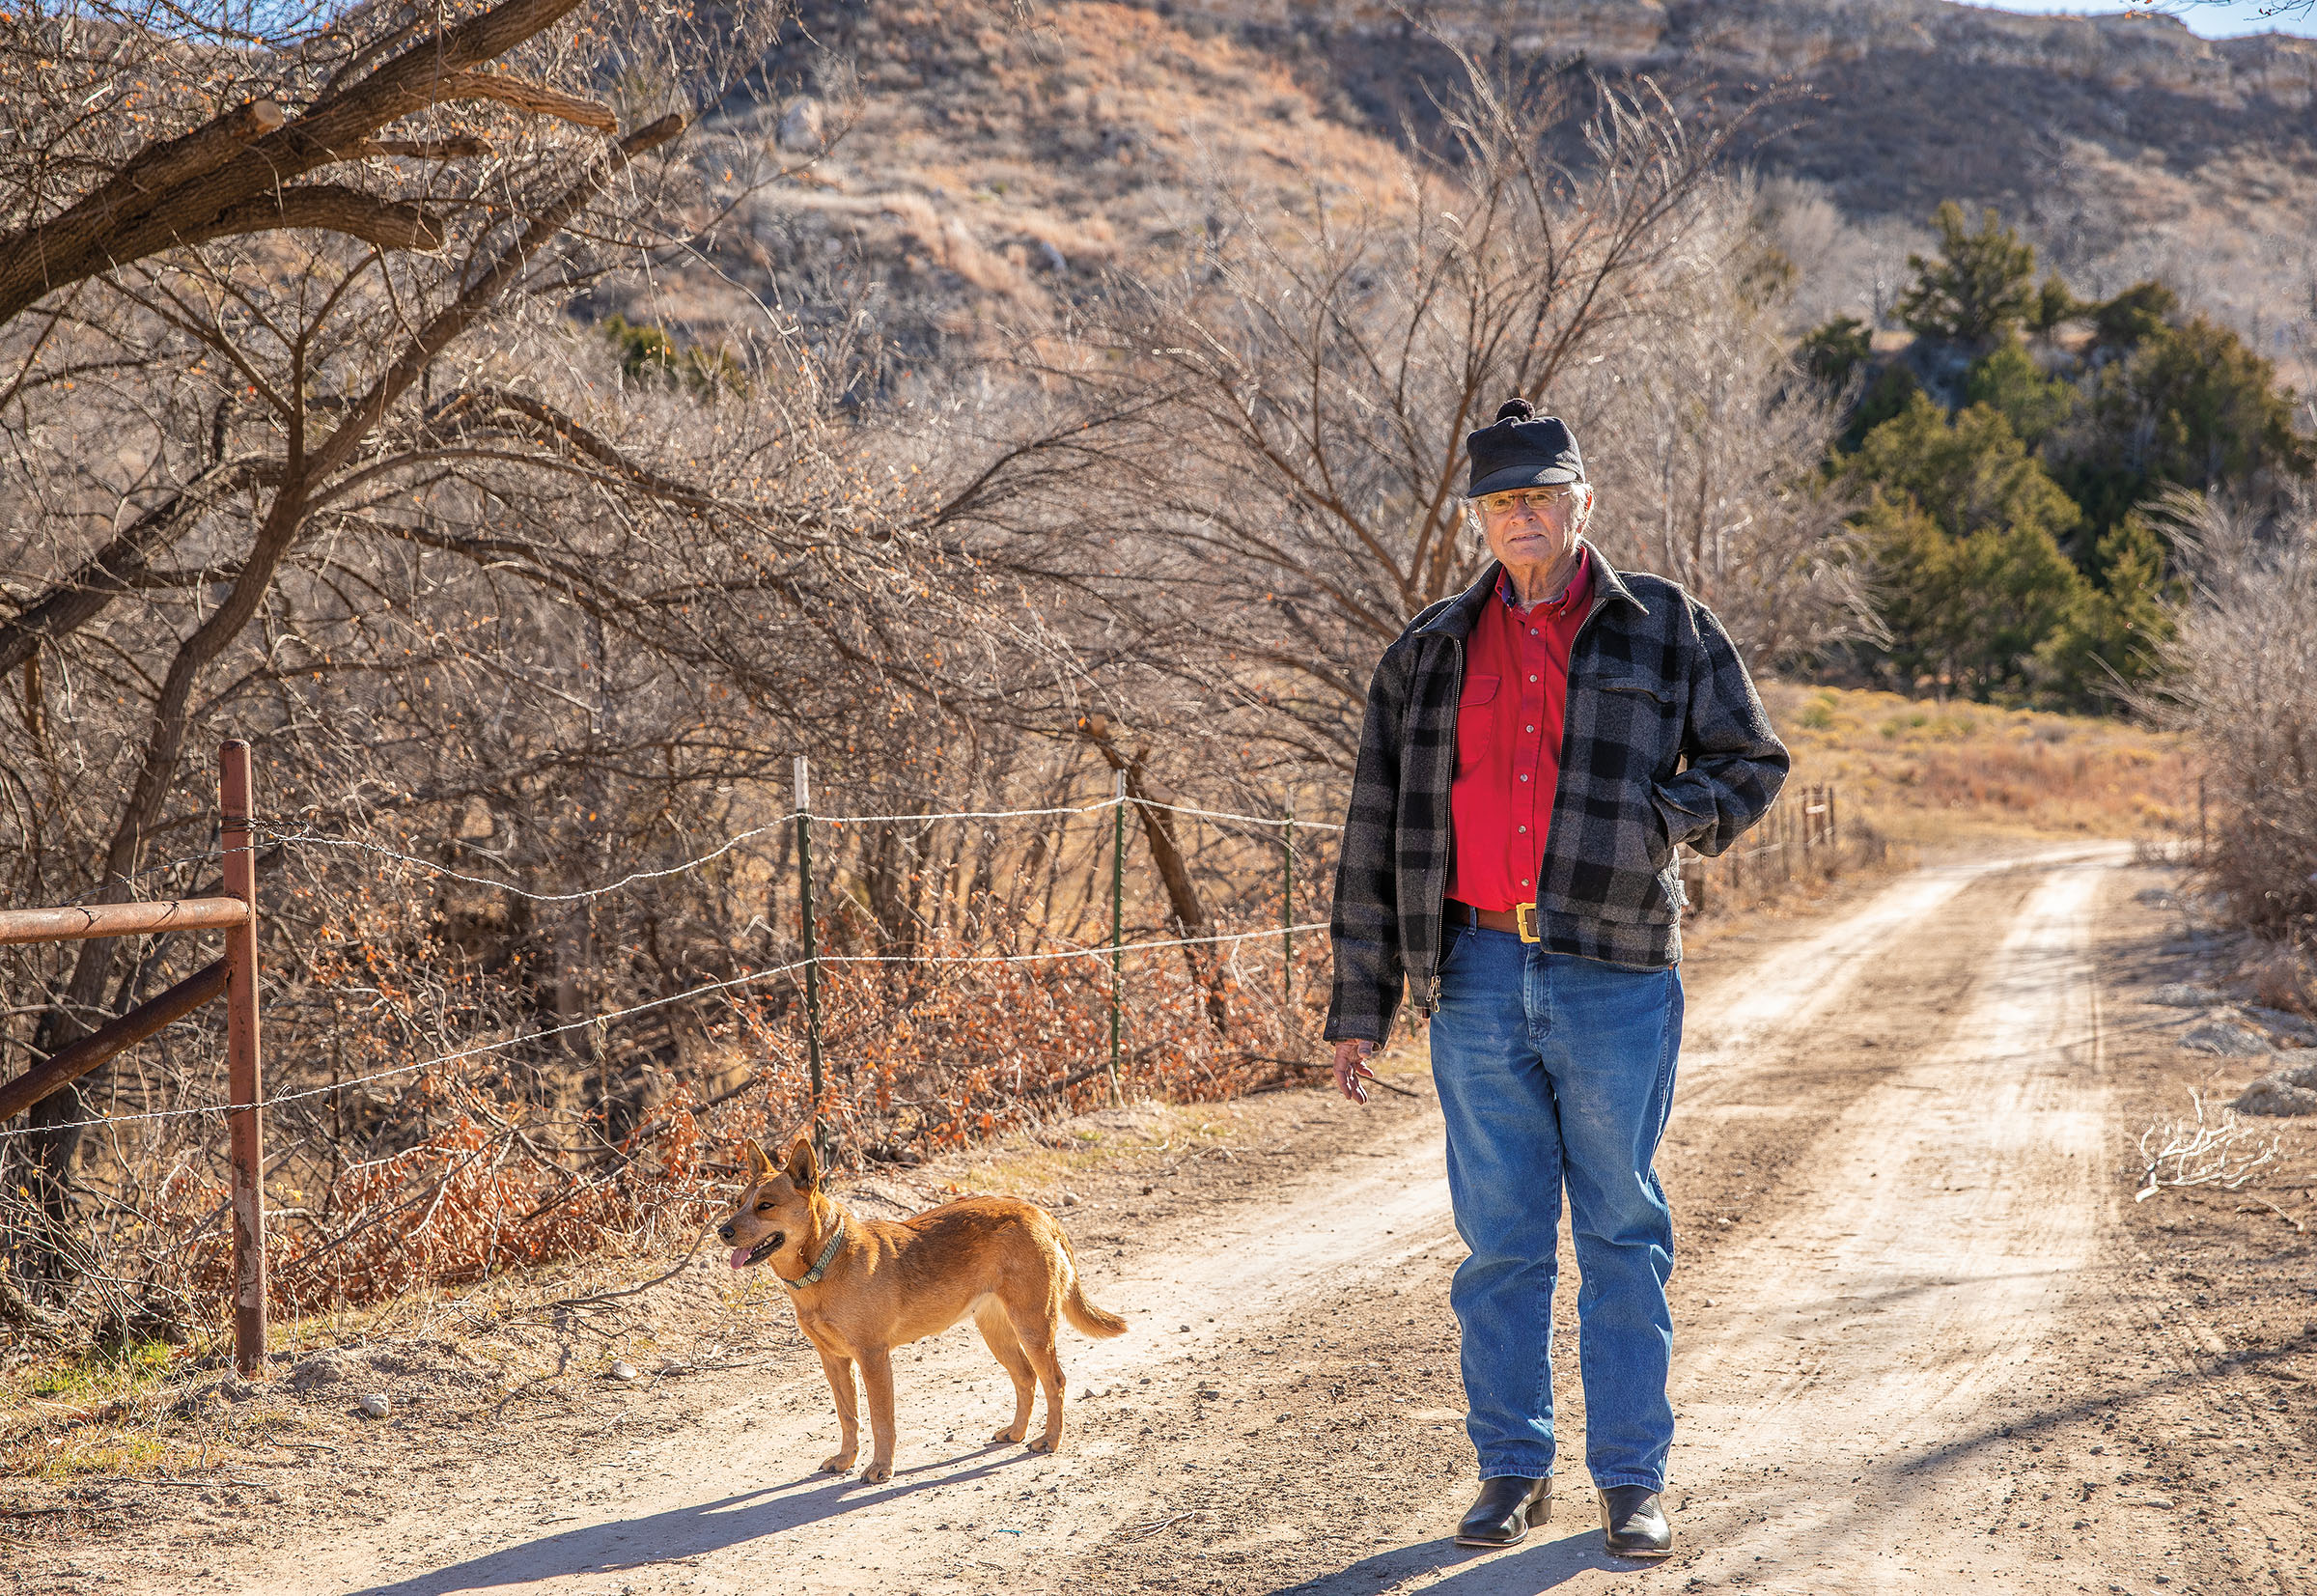 A man in blue jeans and a red shirt walks down a dirt path next to his tan dog